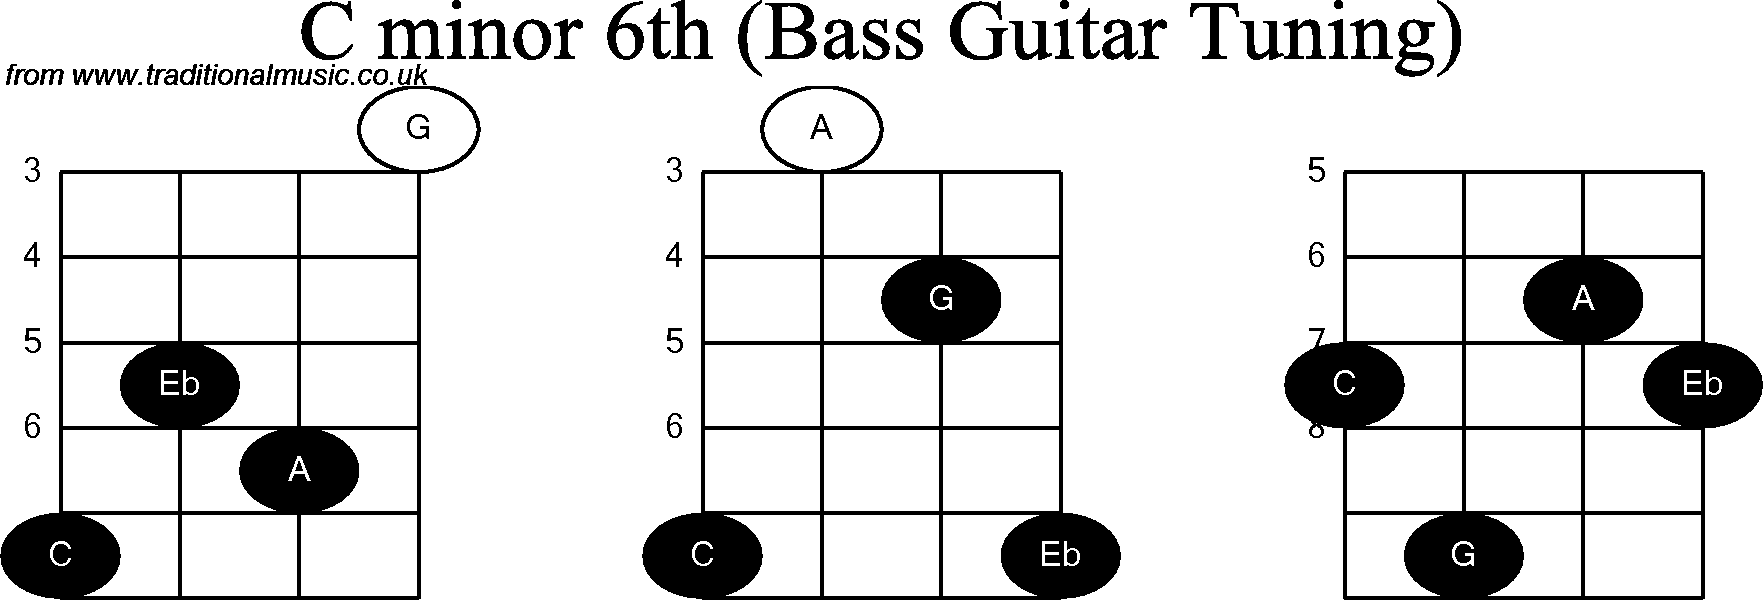 Bass Guitar chord charts for: C Minor 6th